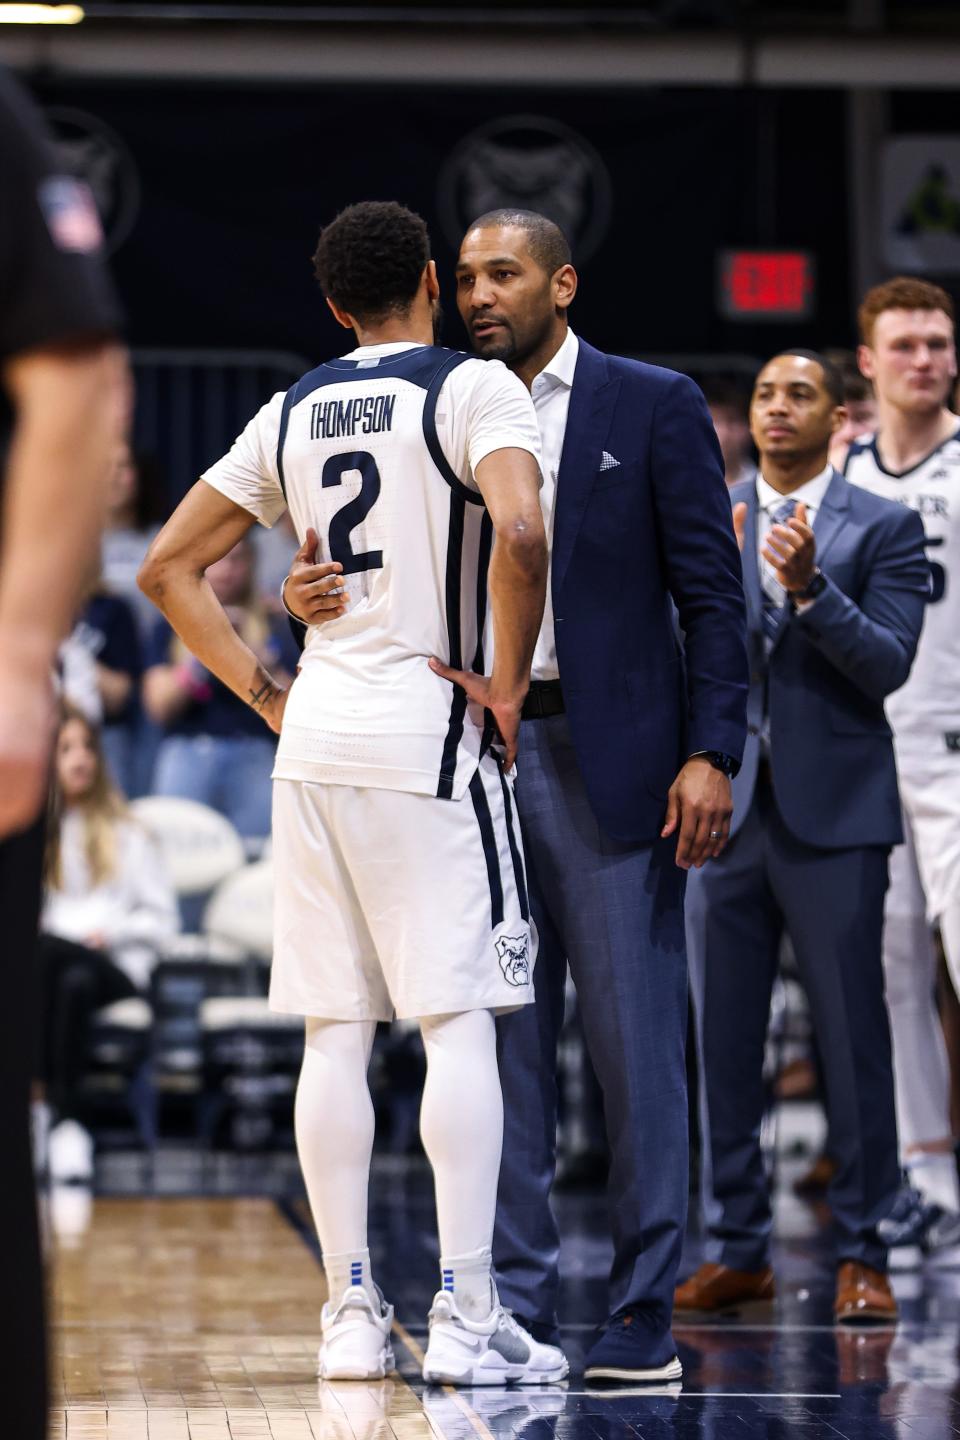 Coach LaVall Jordan of the Butler Bulldogs hugs Aaron Thompson during the second half against the Villanova Wildcats at Hinkle Fieldhouse on March 05, 2022 in Indianapolis, Indiana.